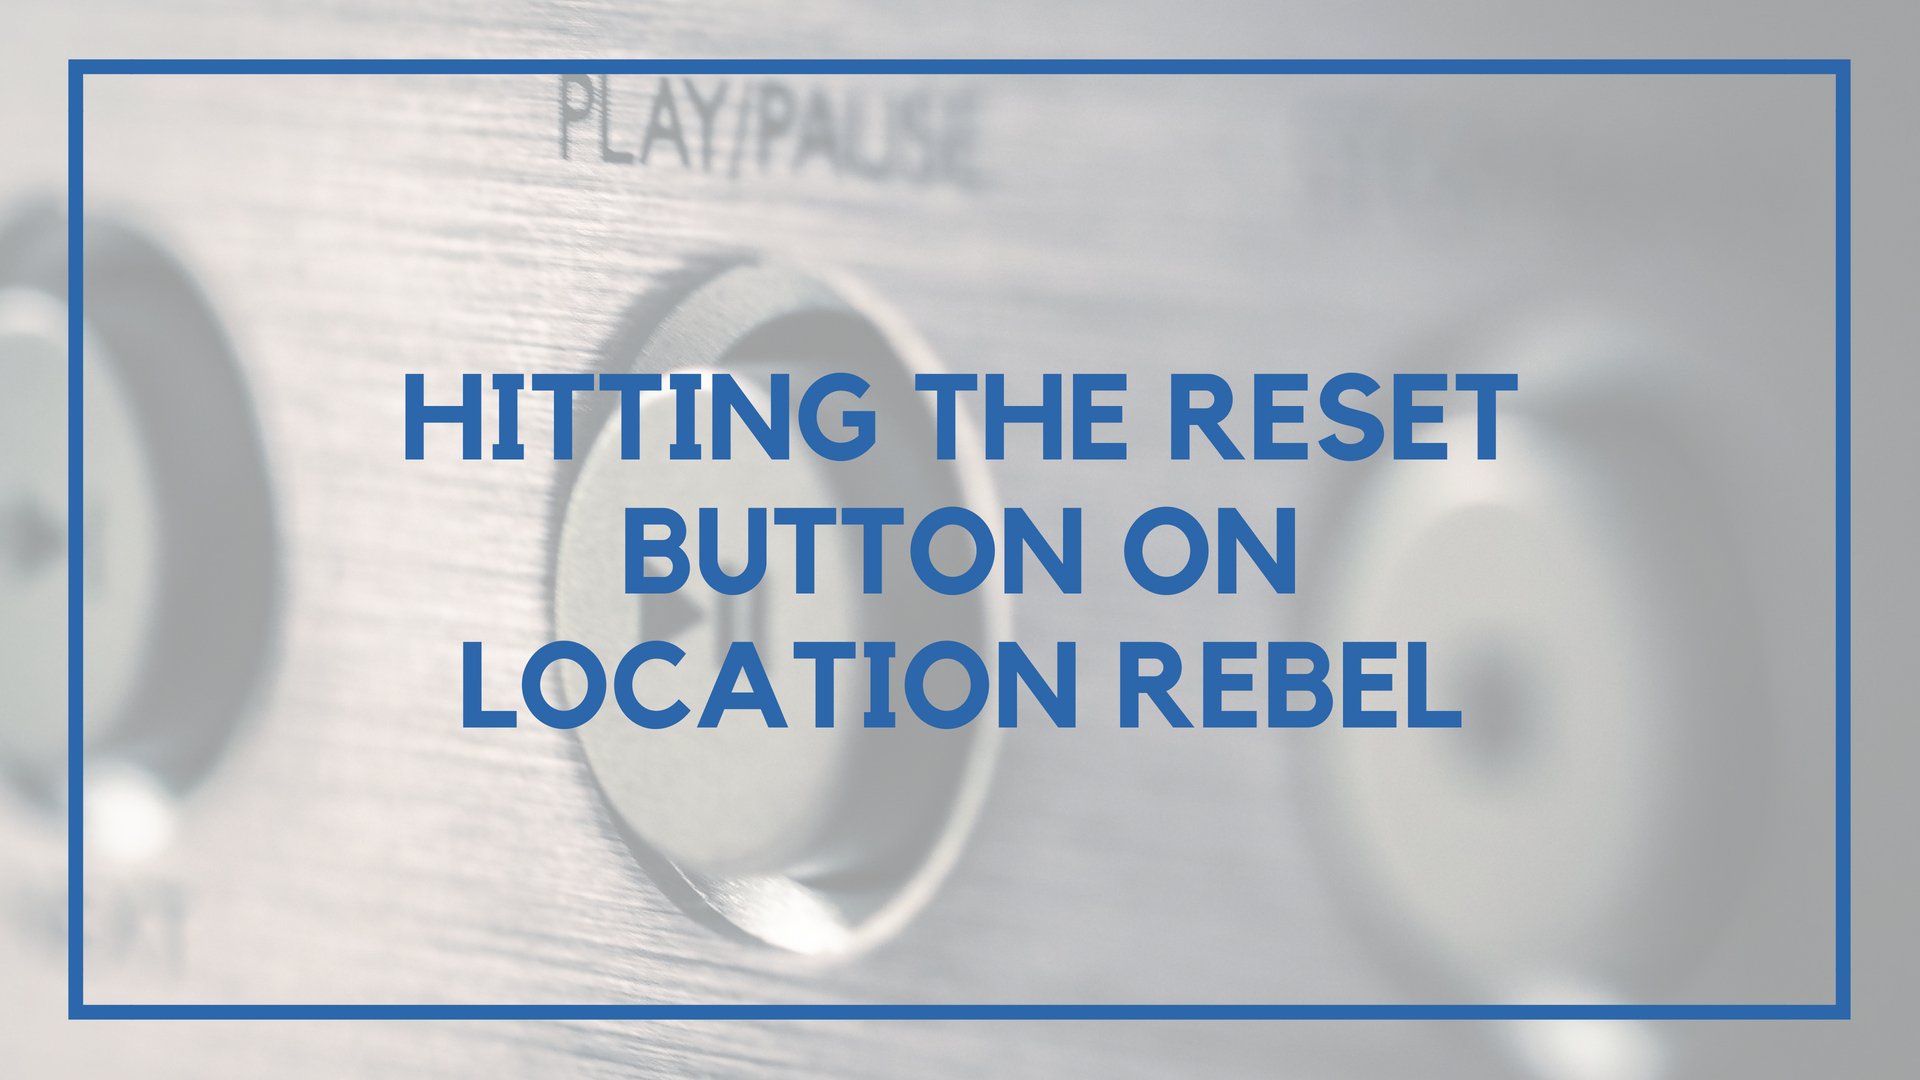 Hitting the Reset Button on Location Rebel